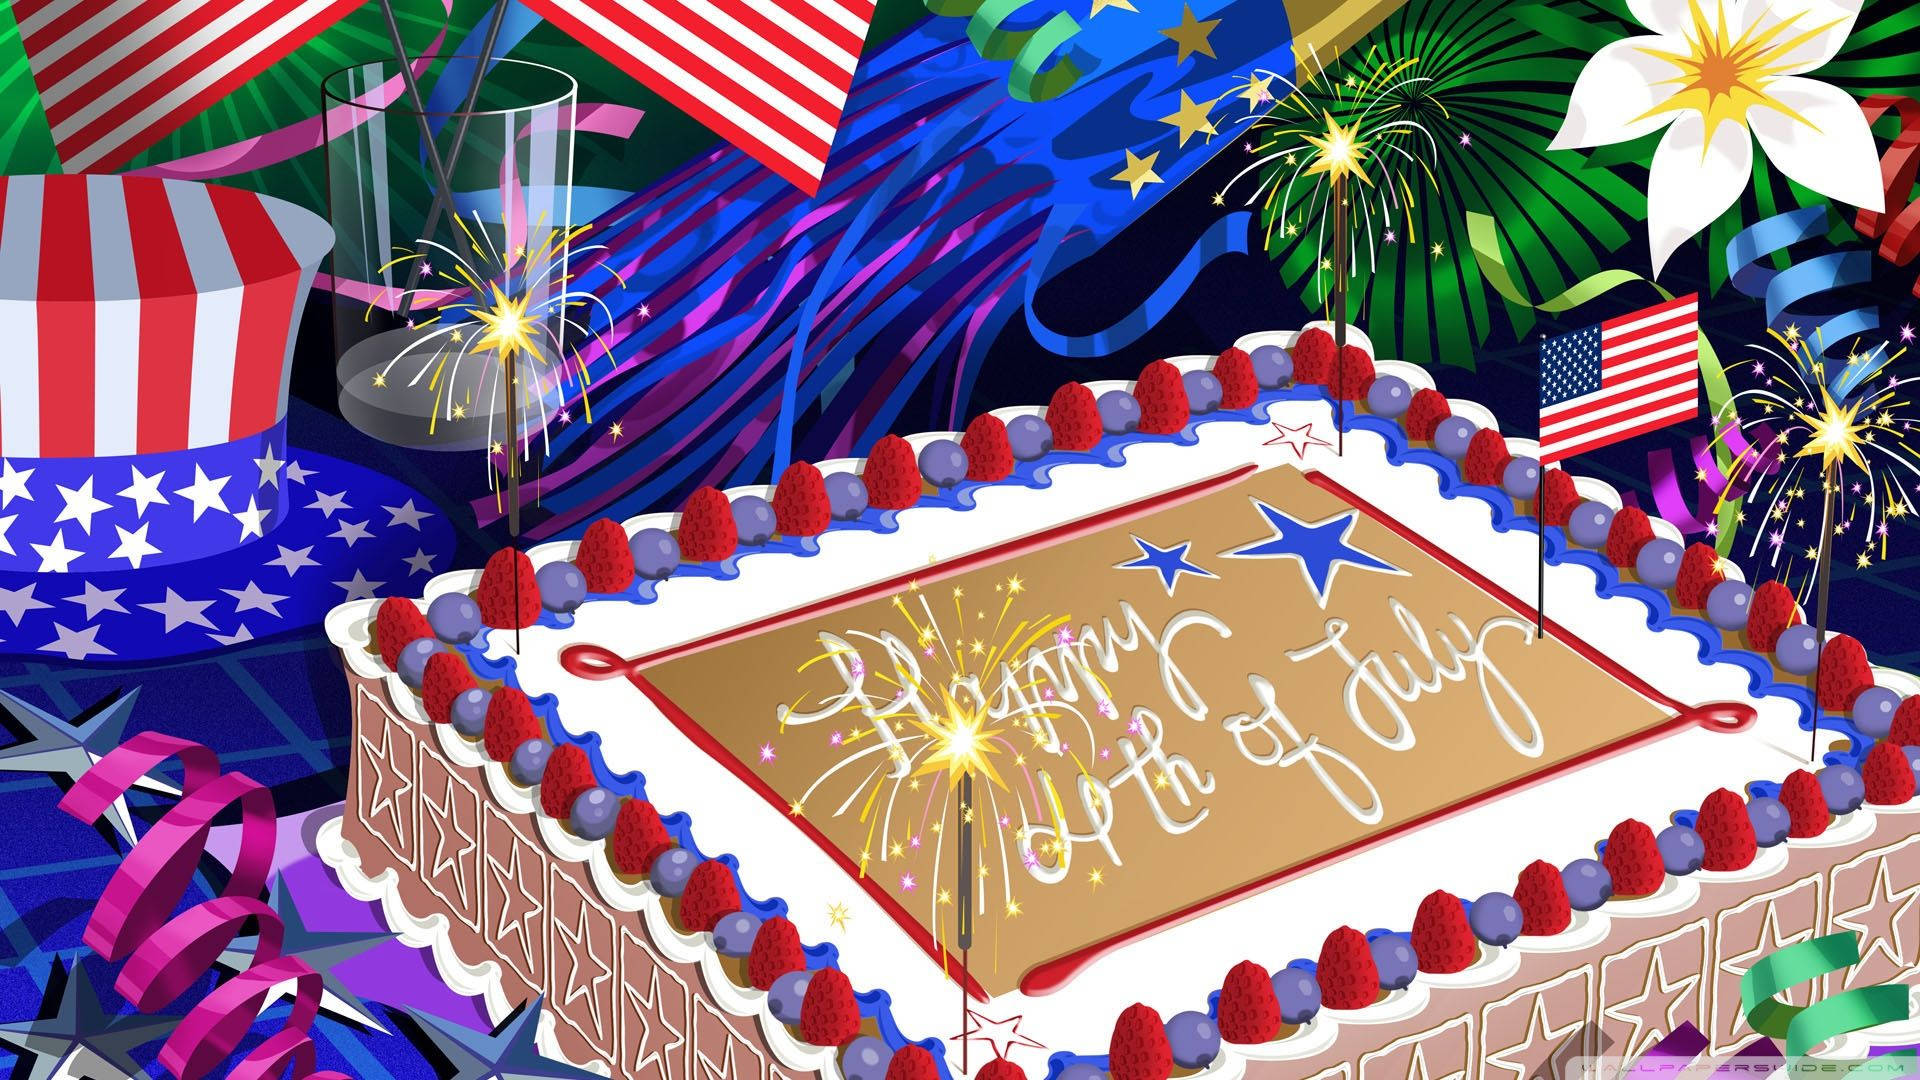 A Cake With Fireworks And Decorations On It Background